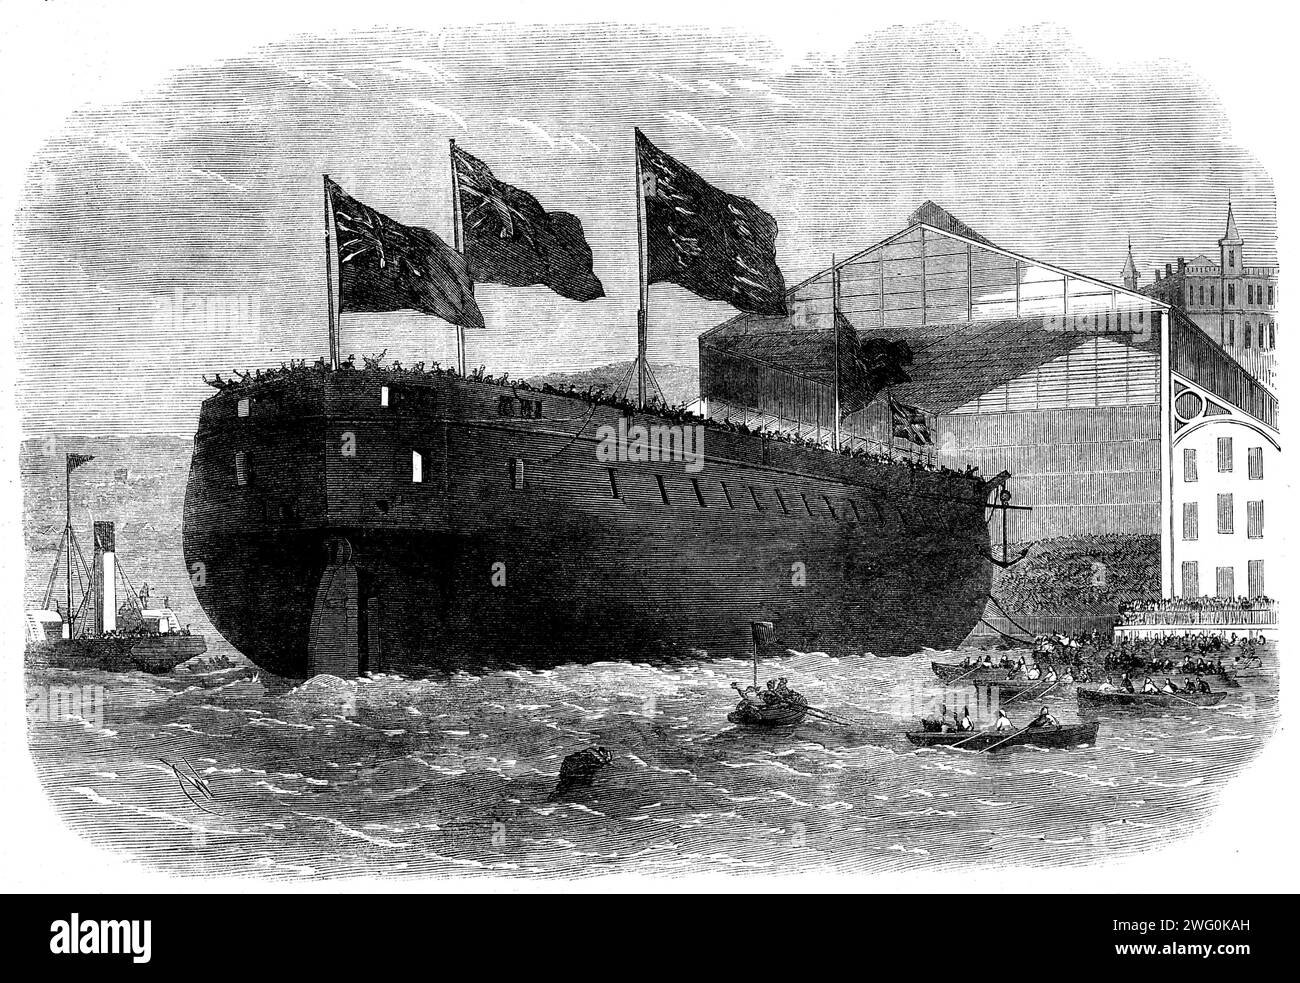 Launch of Her Majesty's armour-plated screw-frigate Caledonia, 31 guns, at Woolwich, [London], 1862. '...the vessel having been named by Miss Nicolson, daughter of the Commodore Superintendent, powerful jackscrews were applied to the keel, and the noble vessel glided down the launching-ways, and swung out into the centre of the river [Thames] amidst the cheers of the spectators, the bands performing &quot;Rule Britannia&quot;...The Caledonia was laid down about three years since as a 90-gun timber-frigate, hut, the Admiralty having abandoned the building of such vessels, she was altered and re Stock Photo